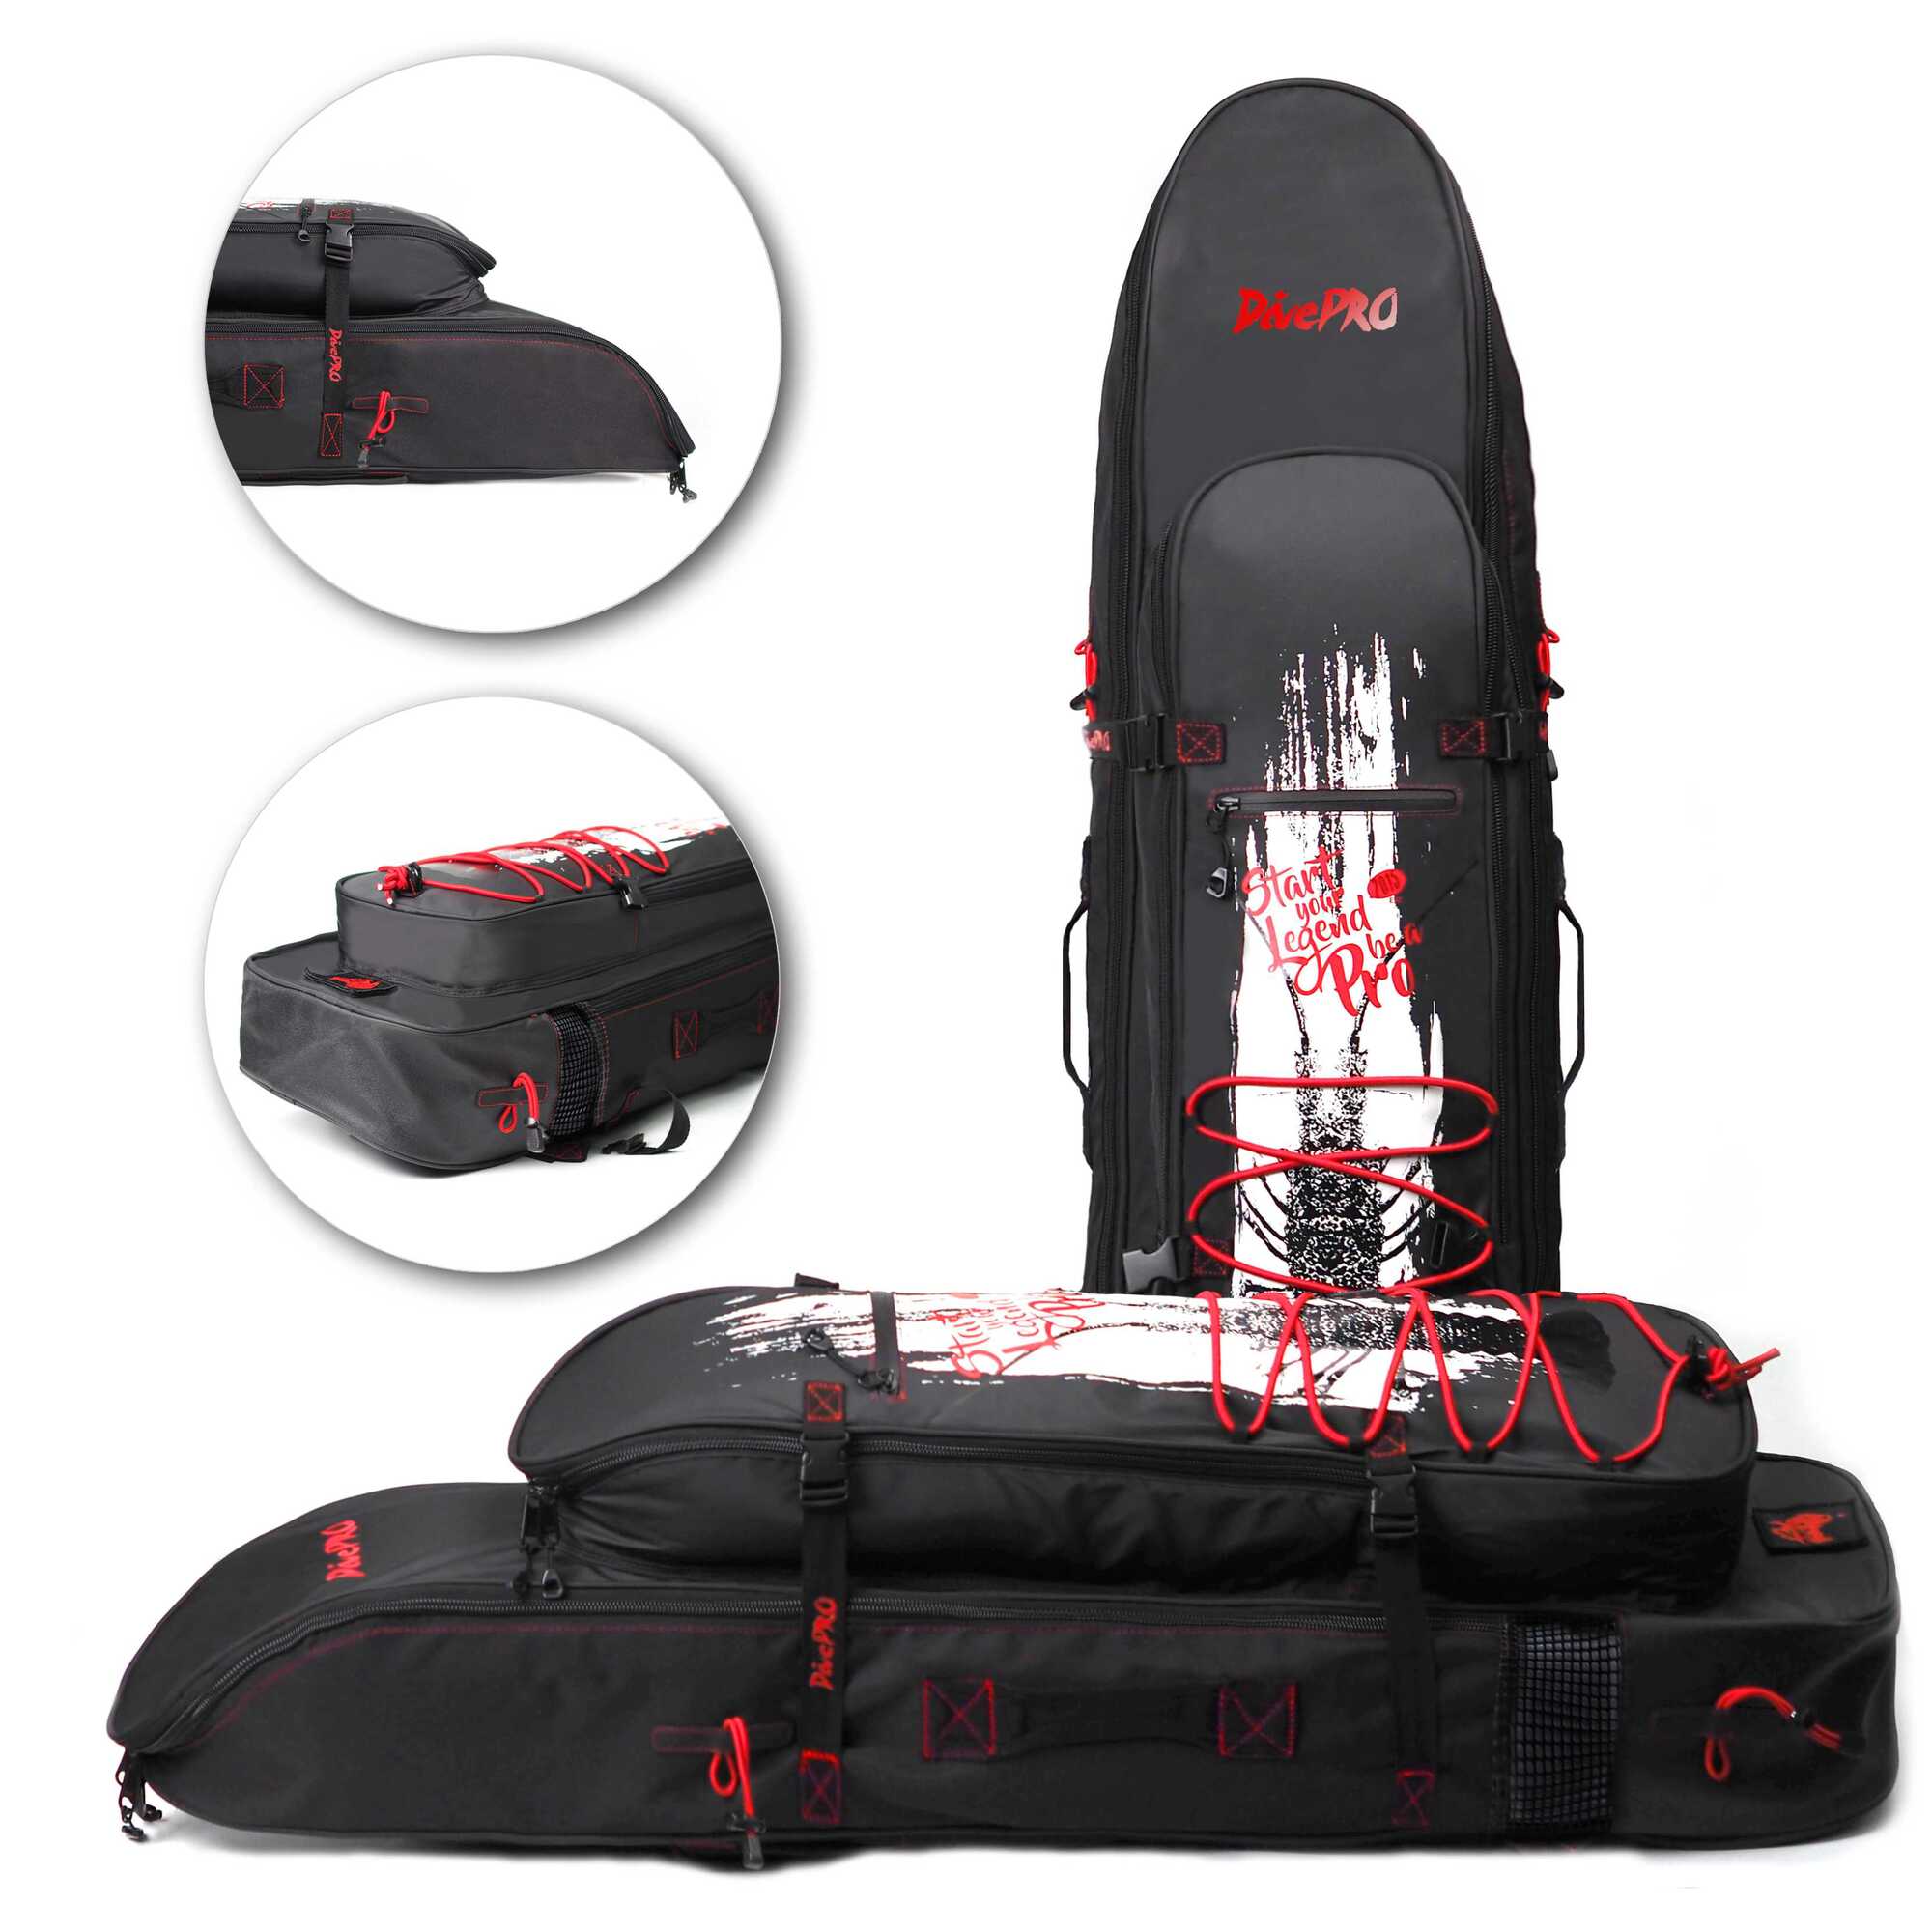 DivePRO Cray Hunter Spearfishing Gear Bag Freediving Backpack Bag